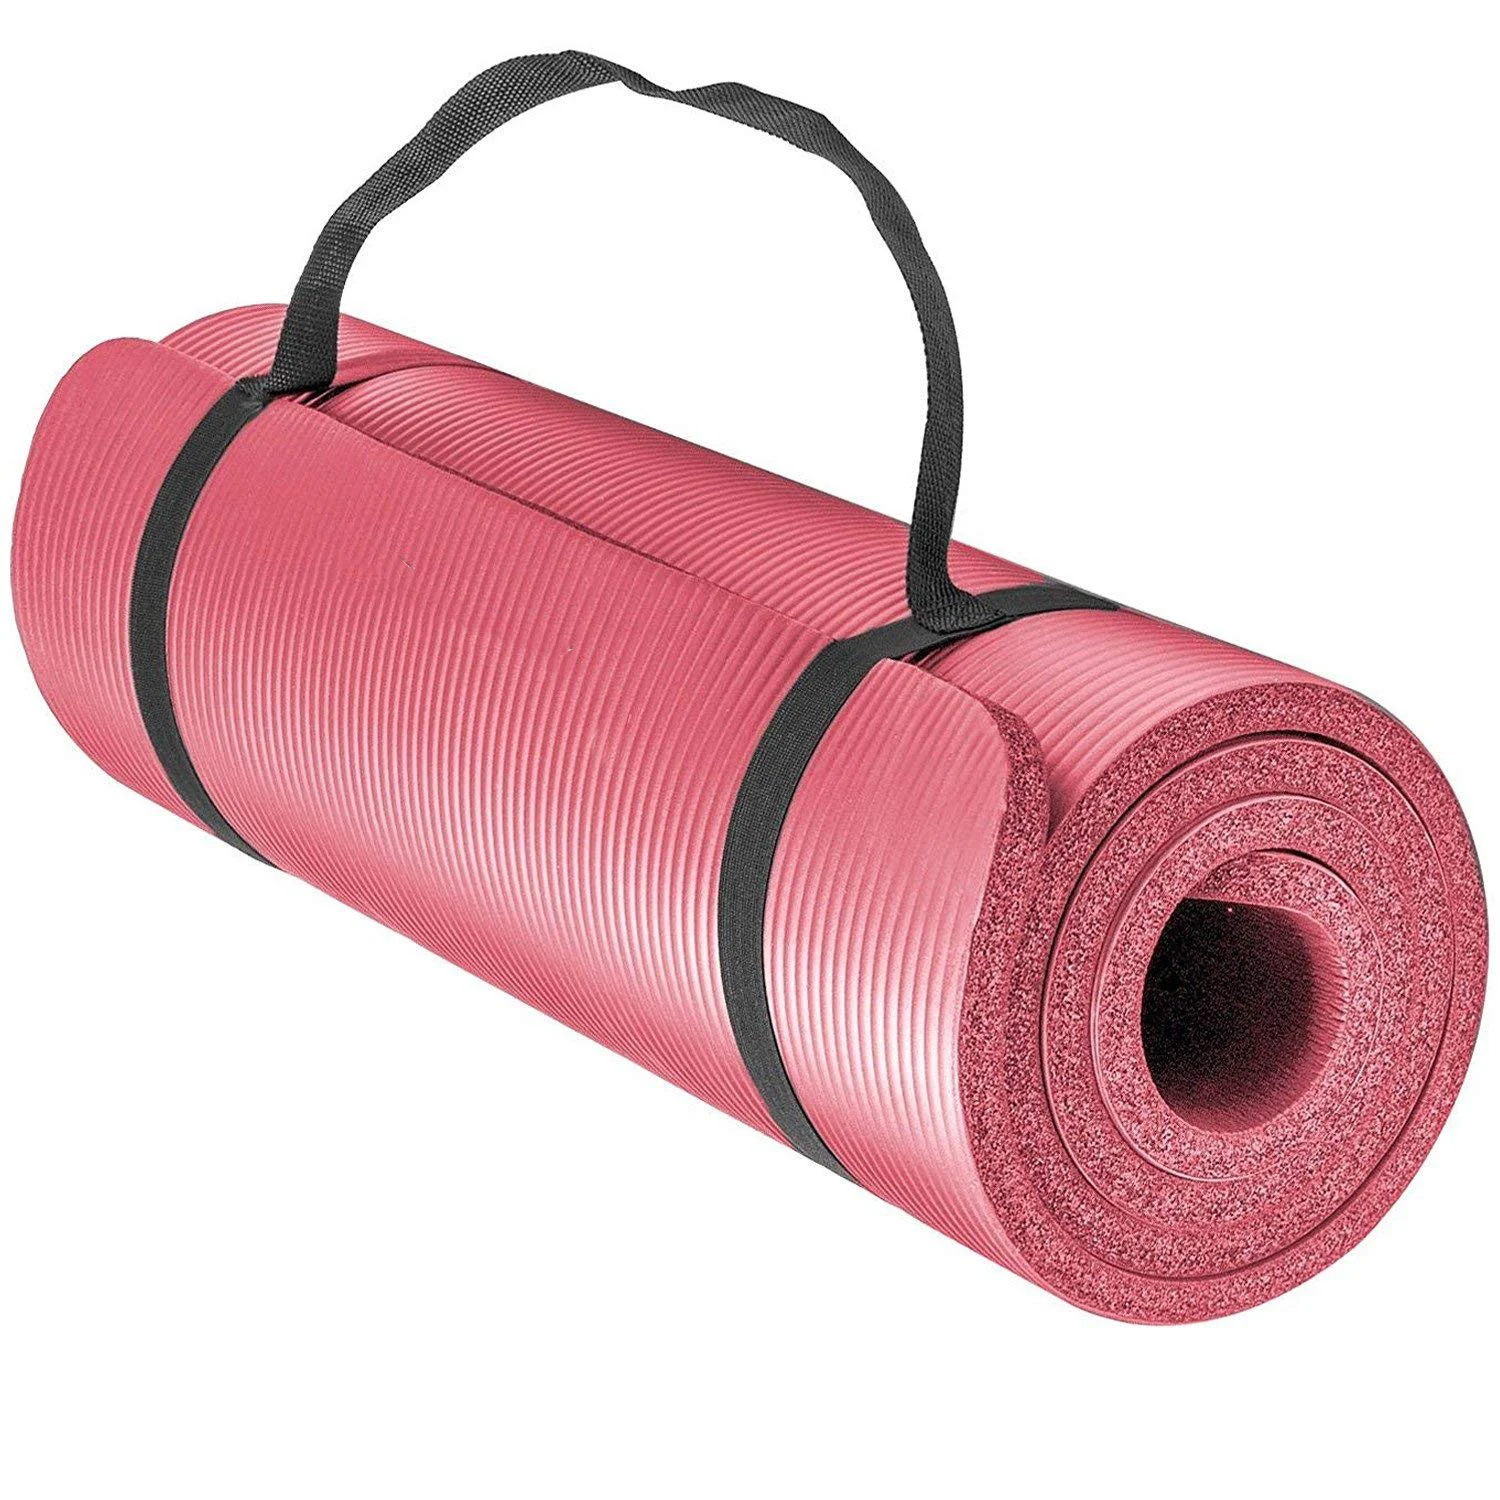 Yoga Mat Slip 10mm Thick Nitrile Rubber Pad for Dancing Gymnastic Pink